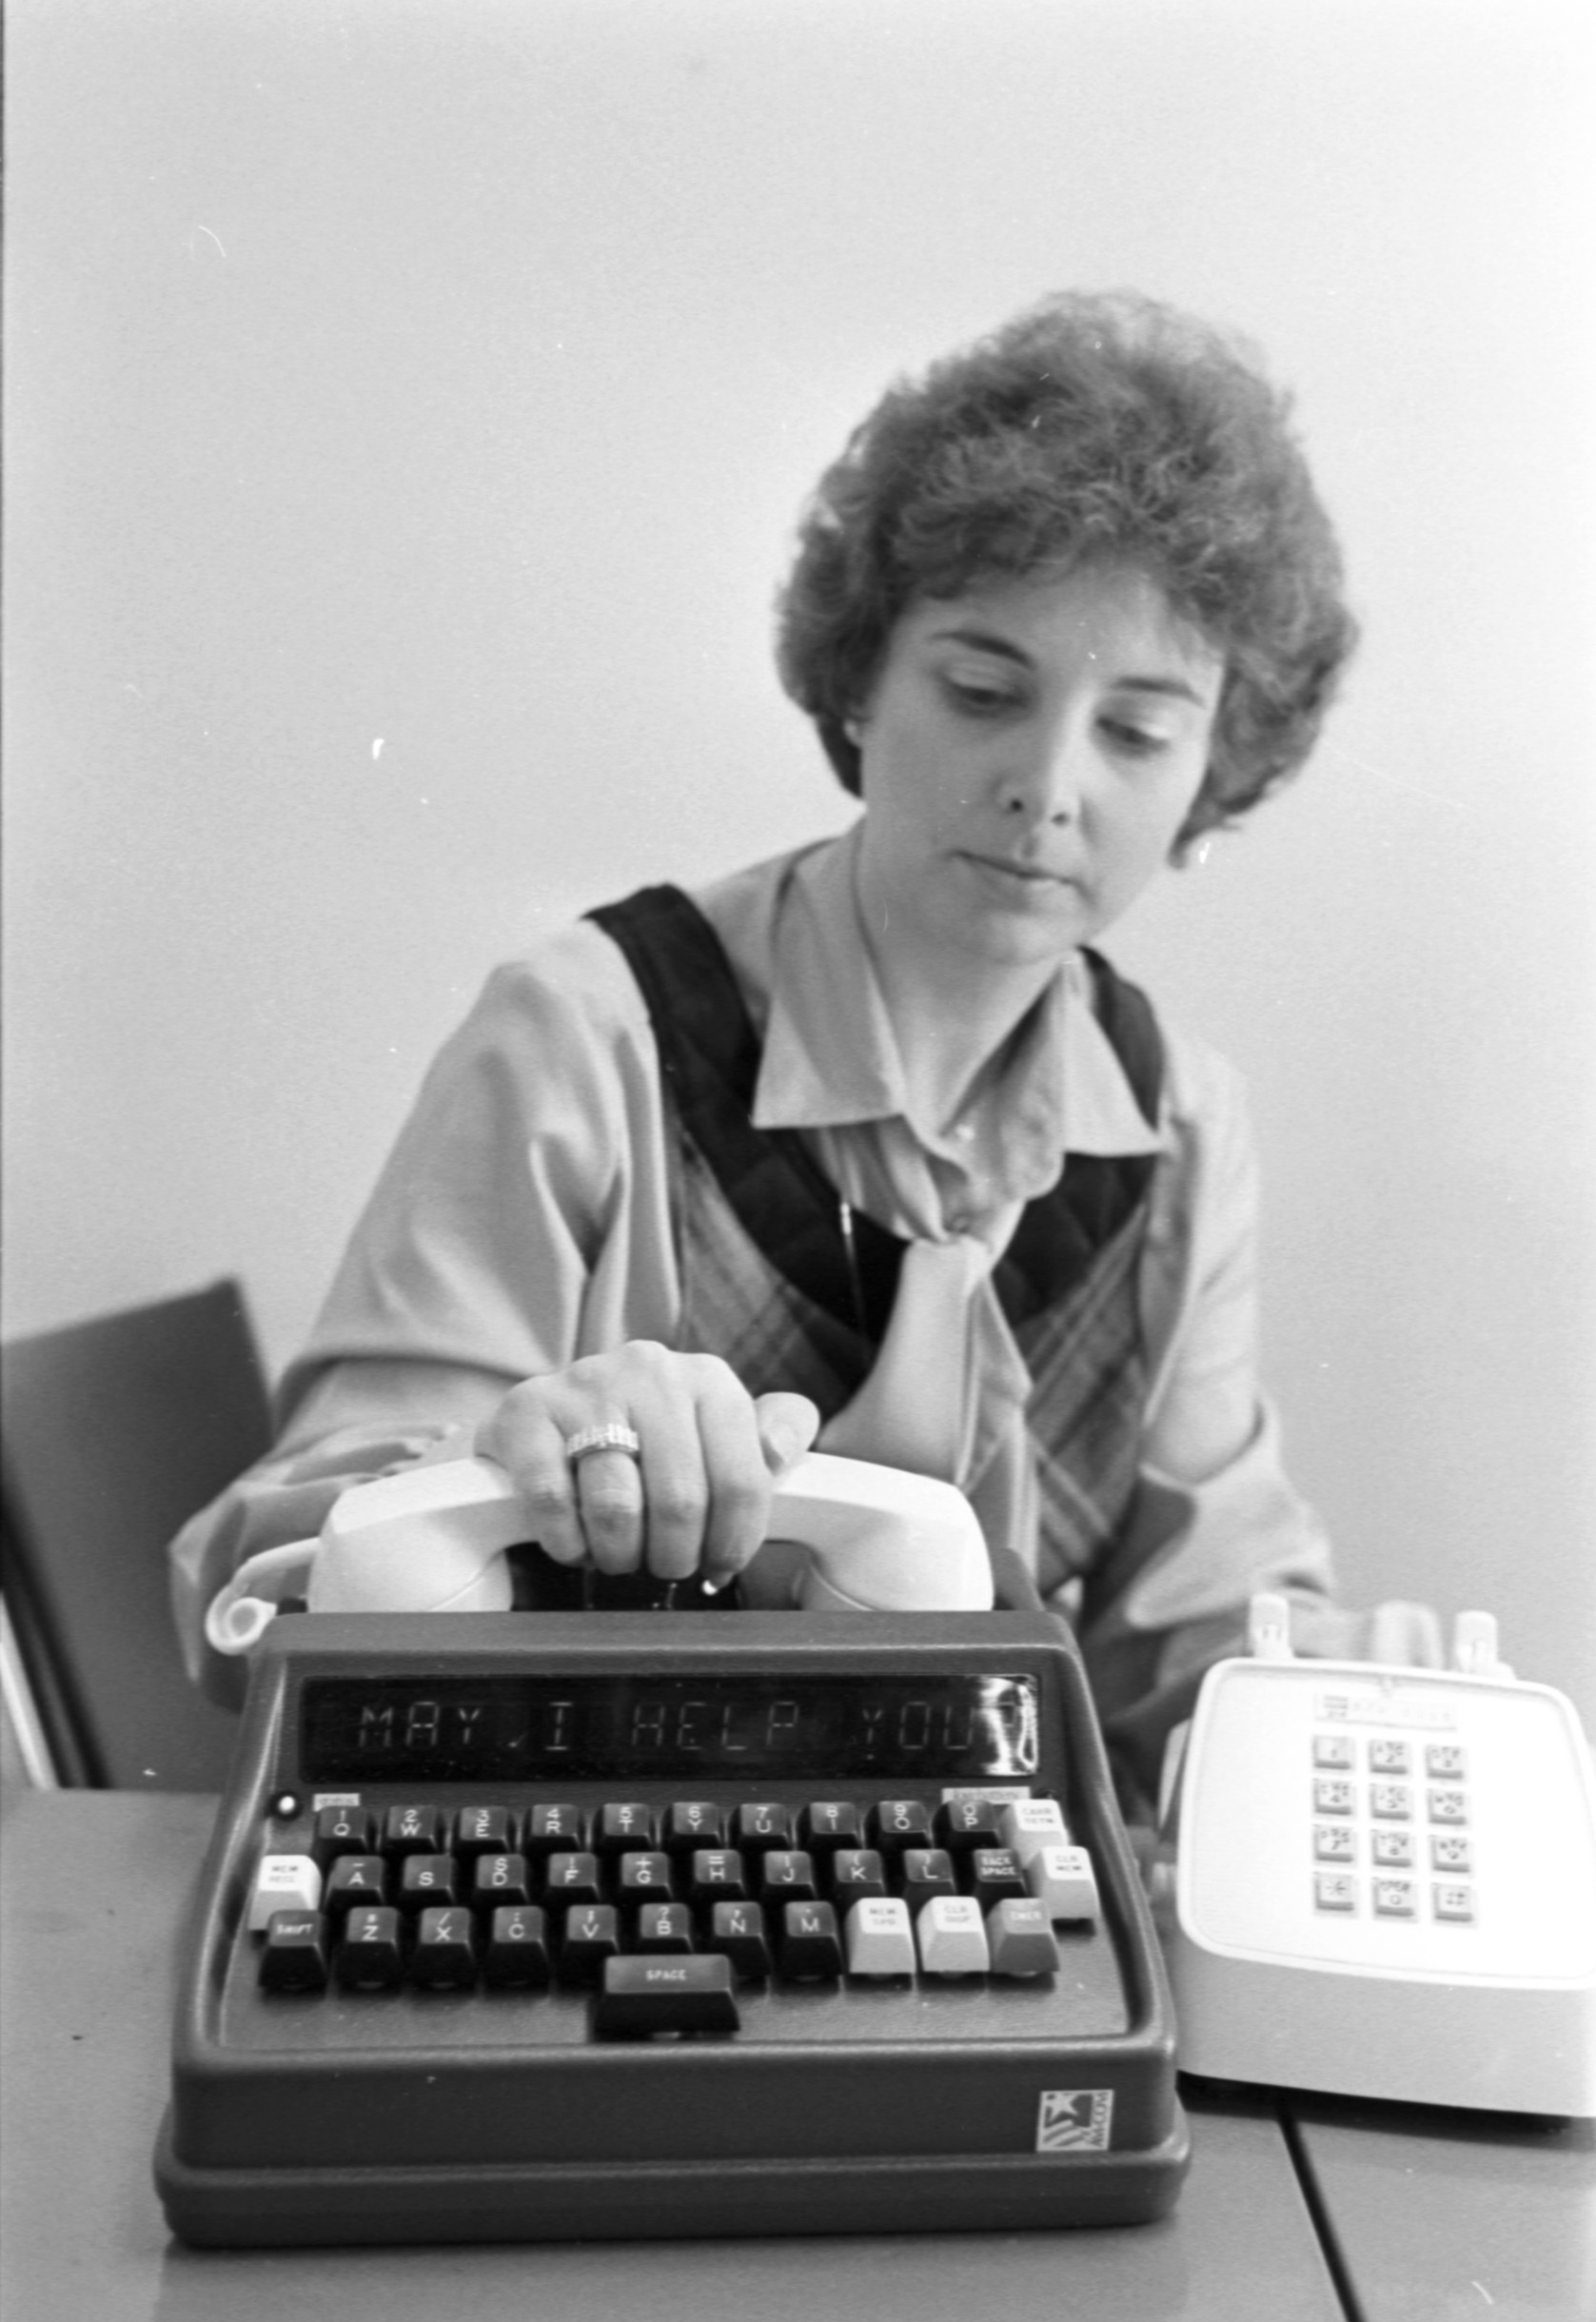 This photograph, from the Dallas-Fort Worth Airport's Community Services office, depicts a woman setting down a telephone receiver. The telephone was built to be accessible and usable for Deaf and Hard of Hearing users. February 1981.